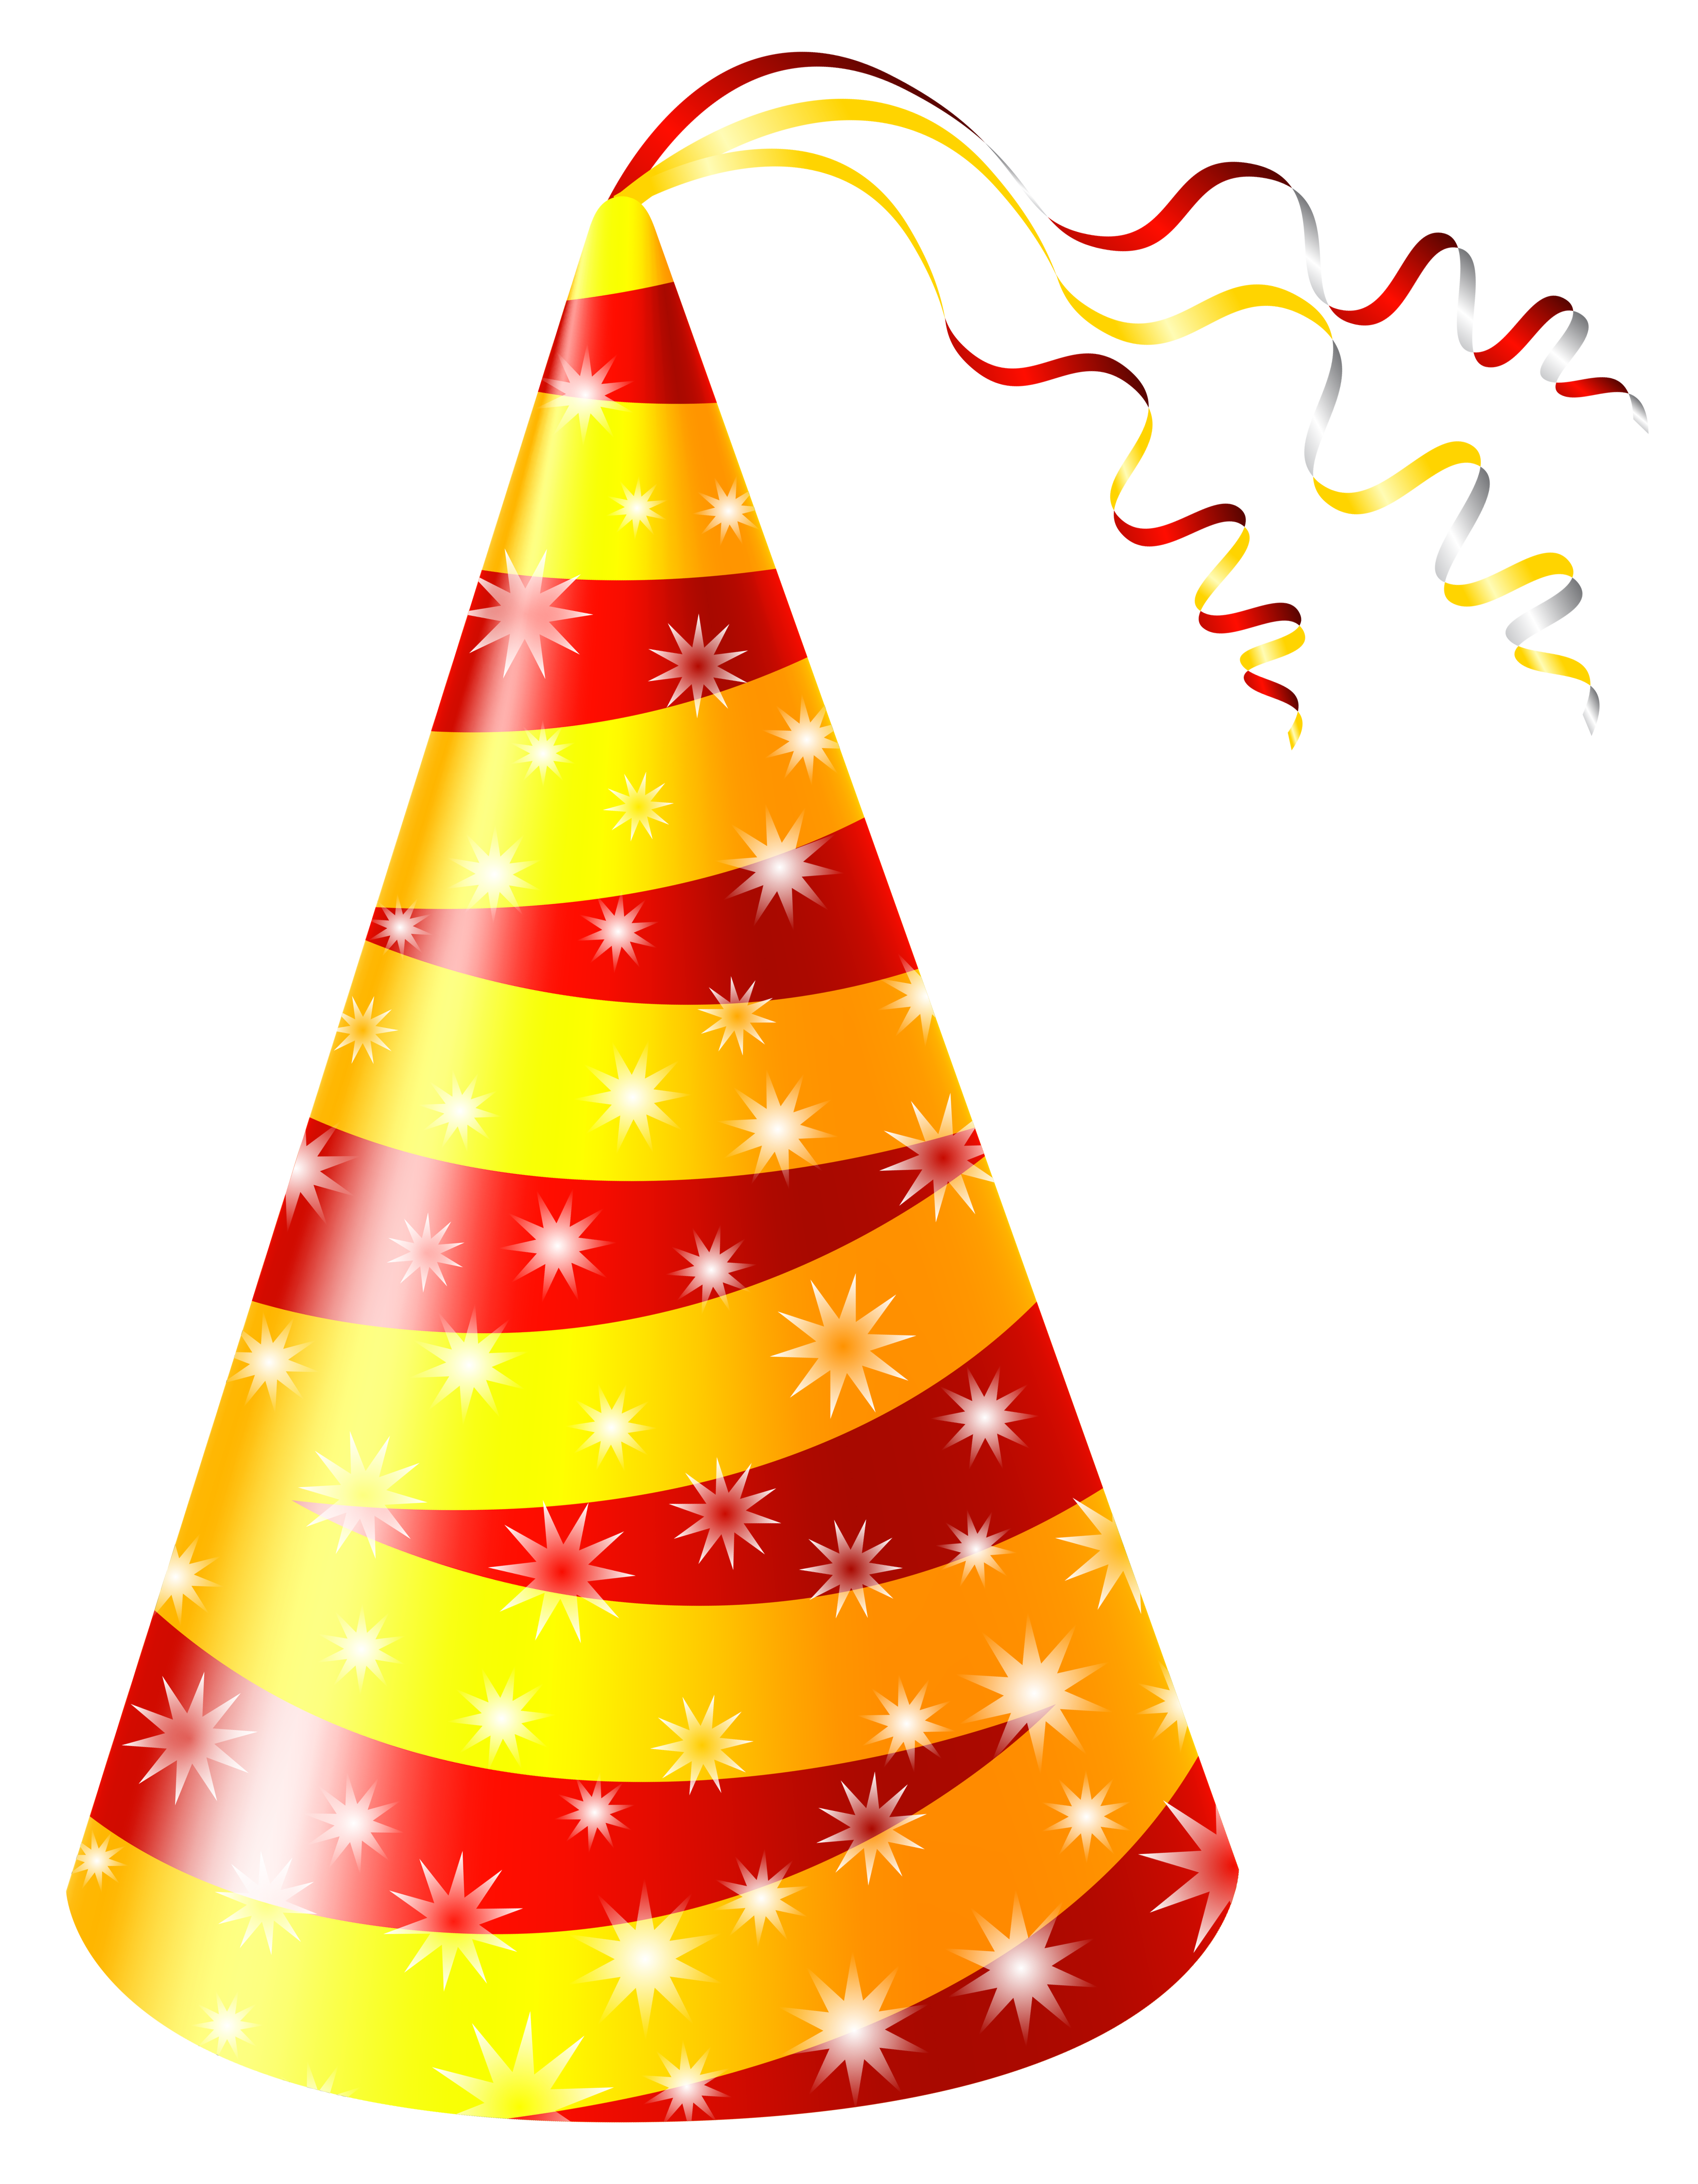 Birthday Hat PNG Transparent Birthday Hat.PNG Images. | PlusPNG